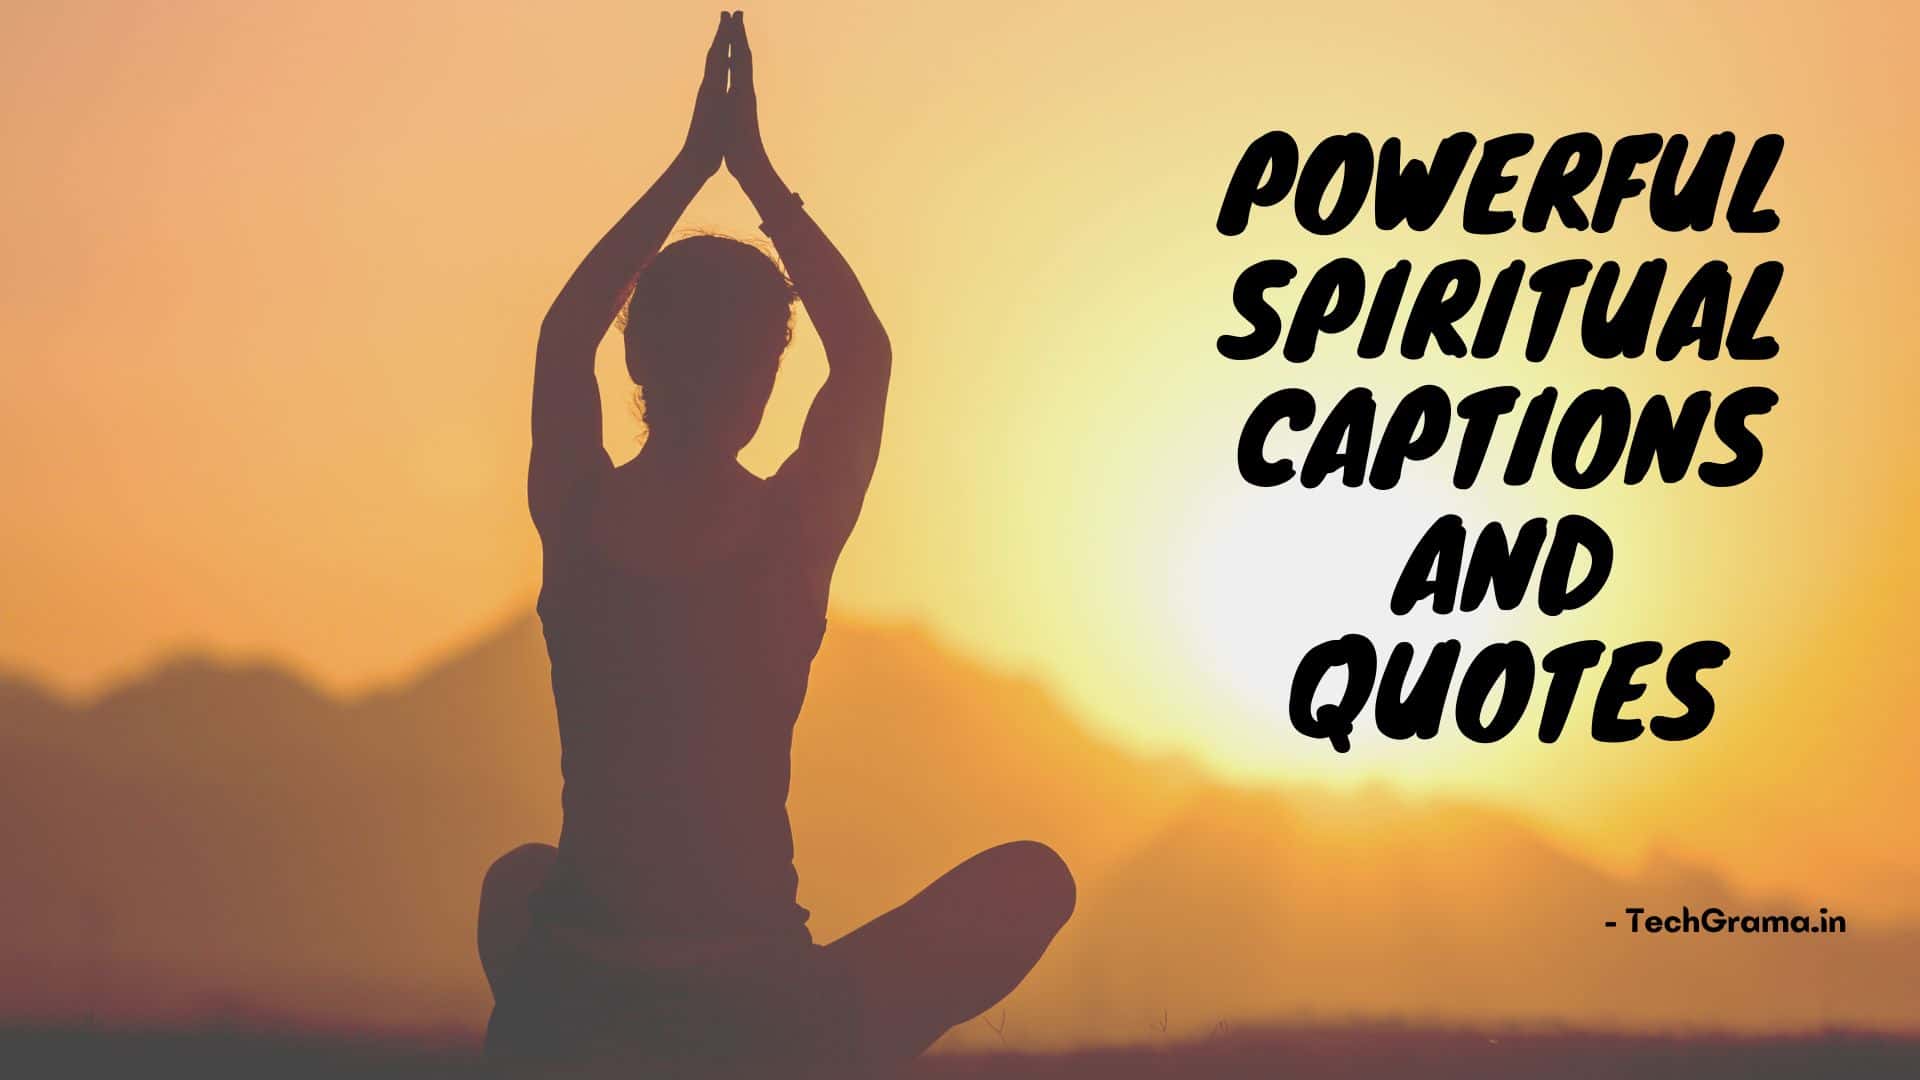 Powerful spiritual captions and quotes, Best Spiritual Captions For Instagram, Spiritual Quotes For Instagram, Spiritual Captions For Selfies, Spiritual Quotes About Life Journey, Spiritual Quotes About Love, Spiritual Instagram Captions, Spiritual Short Quotes, Spiritual IG Captions, and Spiritual Quotes About Life.